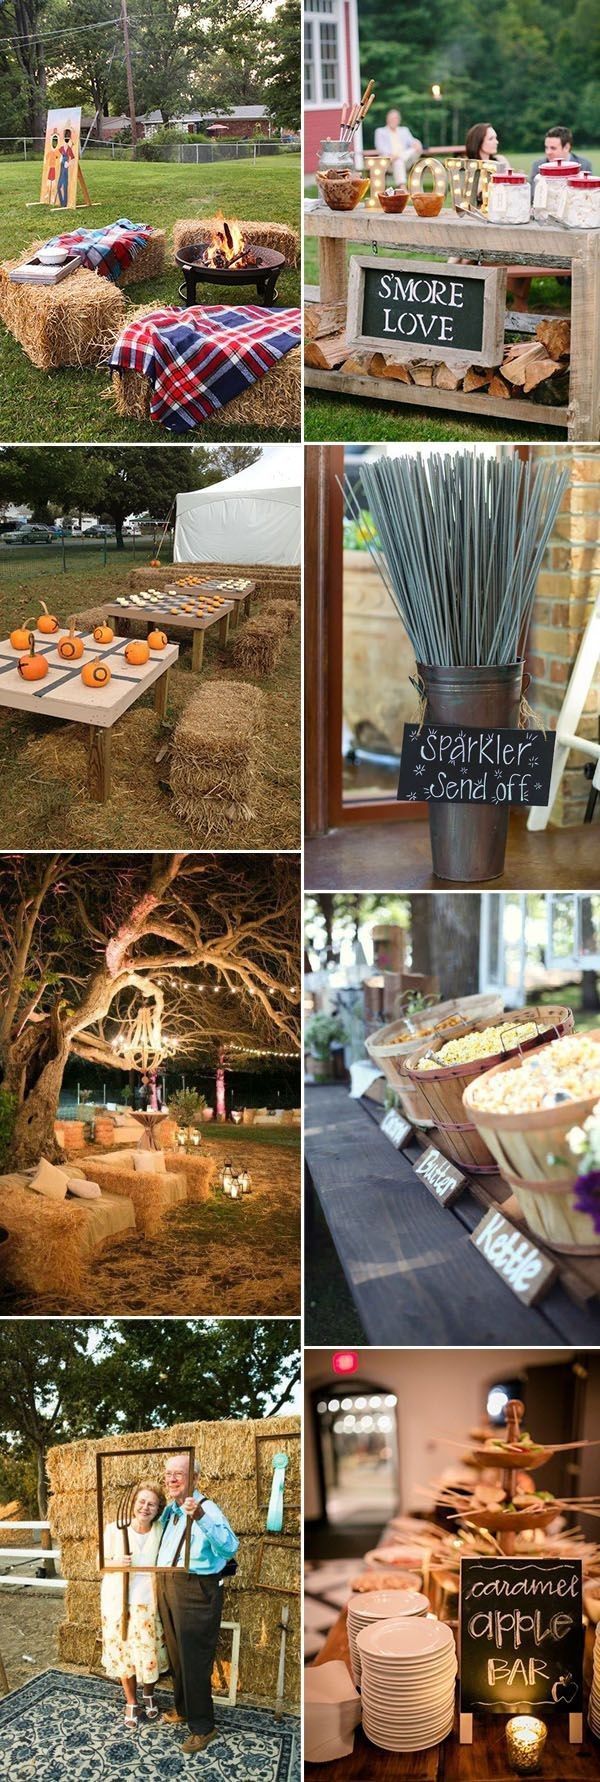 31 Wedding Ideas for Fall Simple but Special -   17 wedding Simple chic ideas